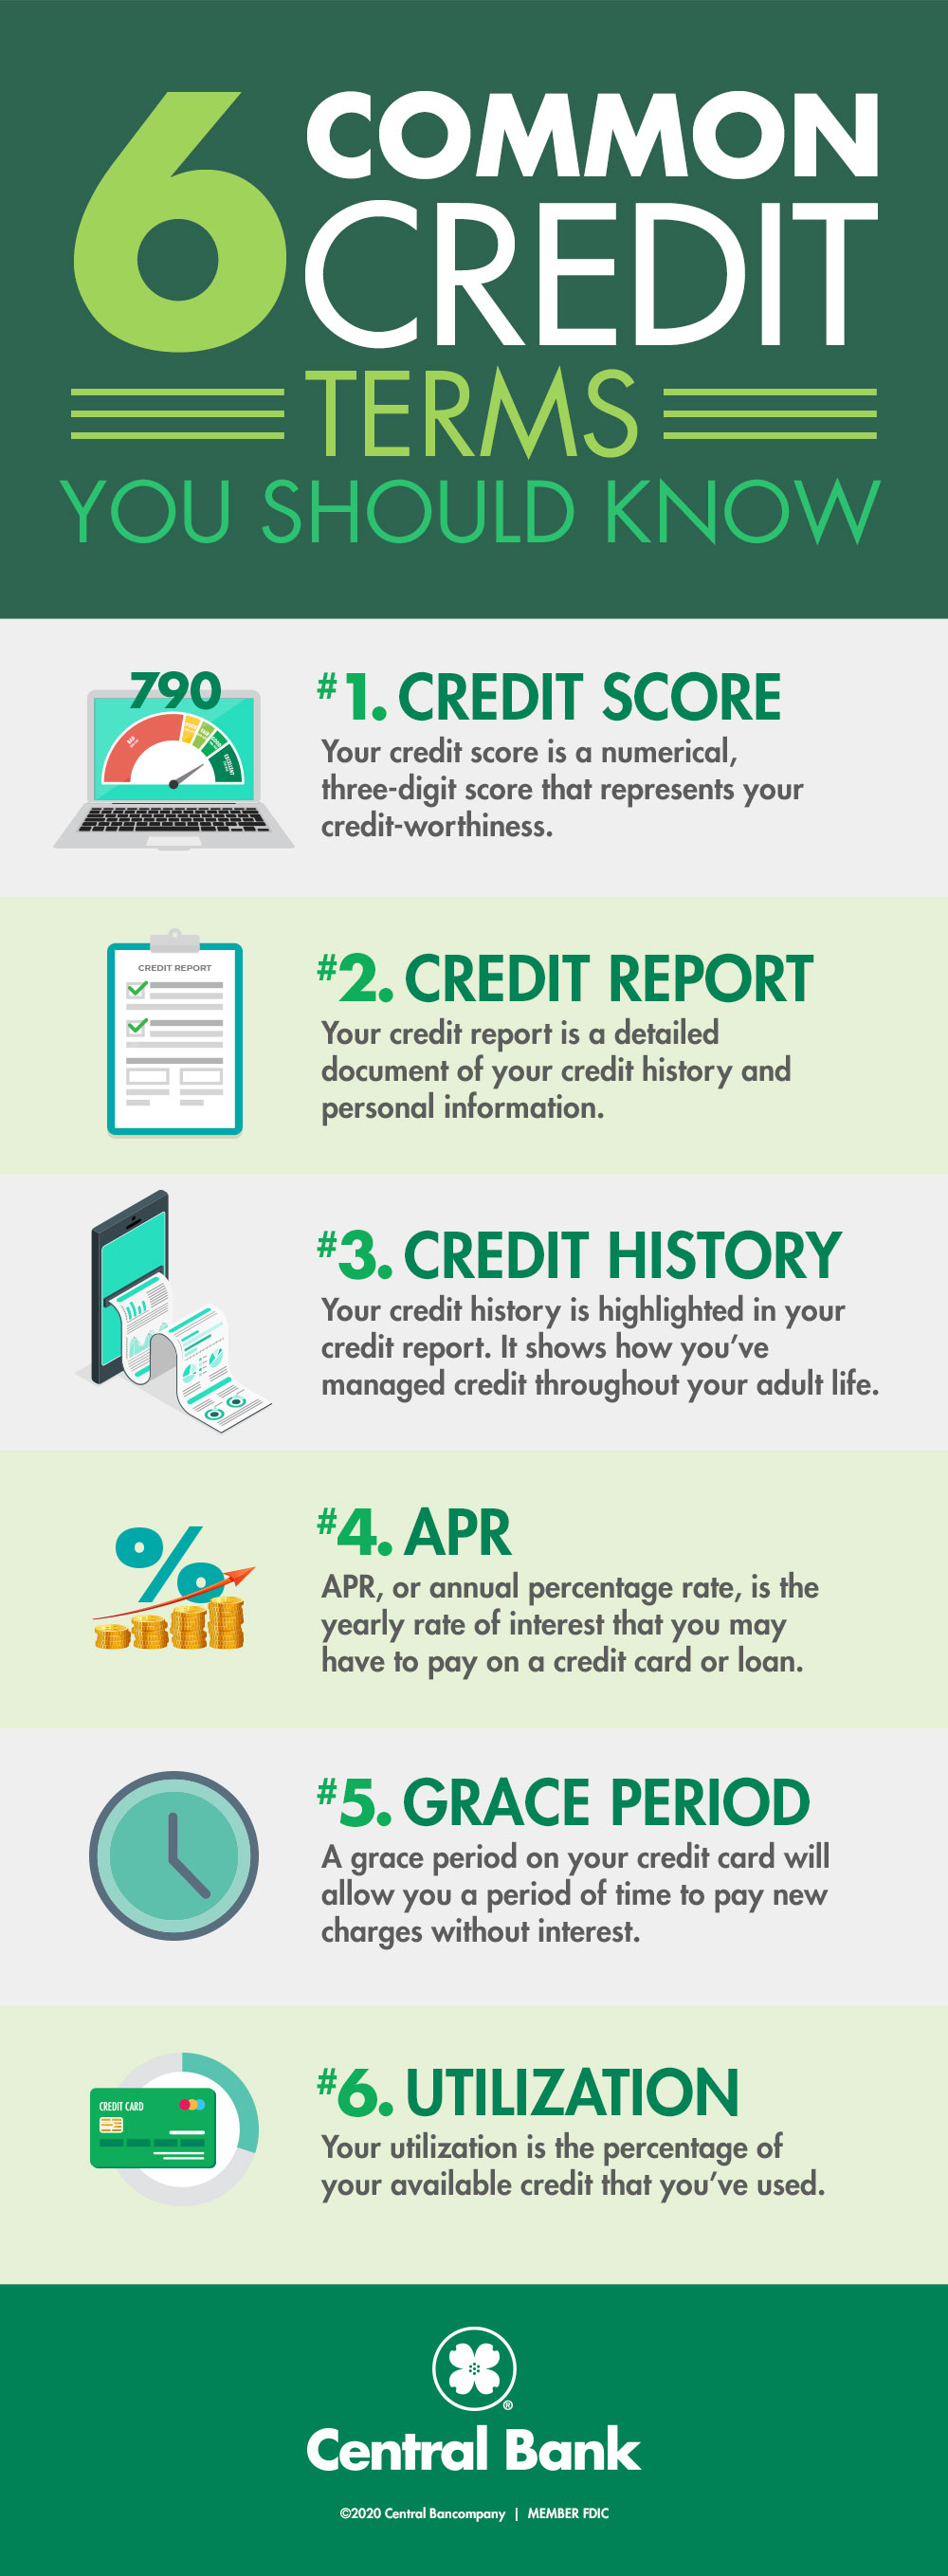 6 Common Credit Terms You Should Know | Central Bank